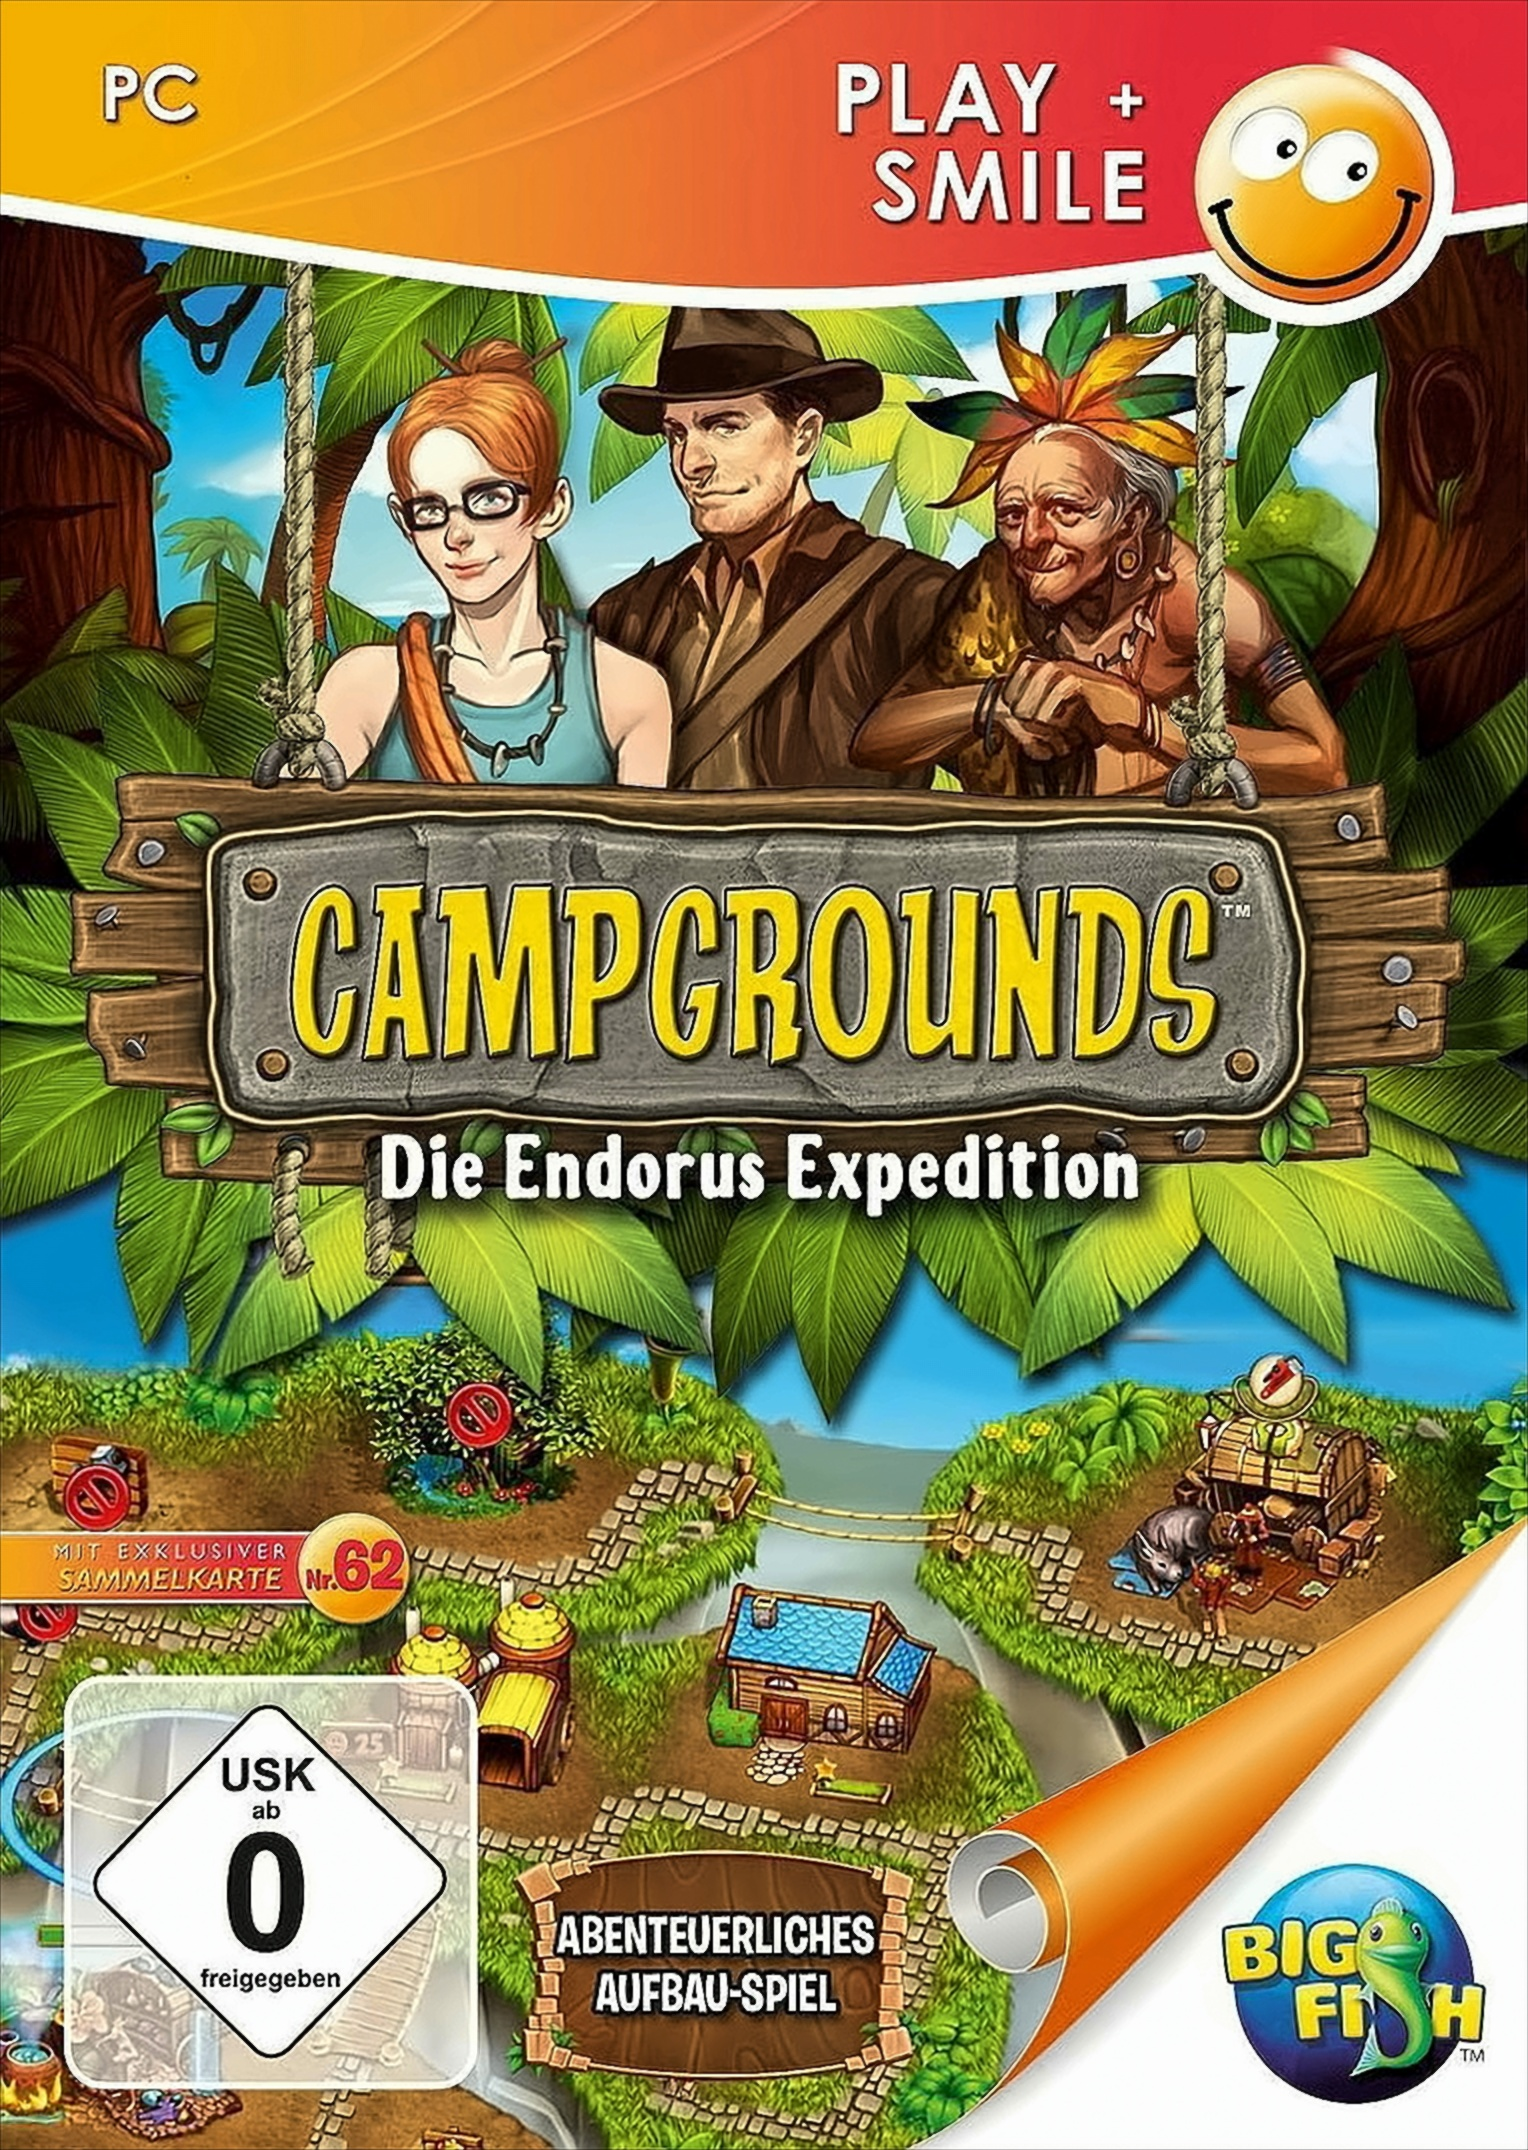 Campgrounds Endorus 2 - [PC] Expedition - Die